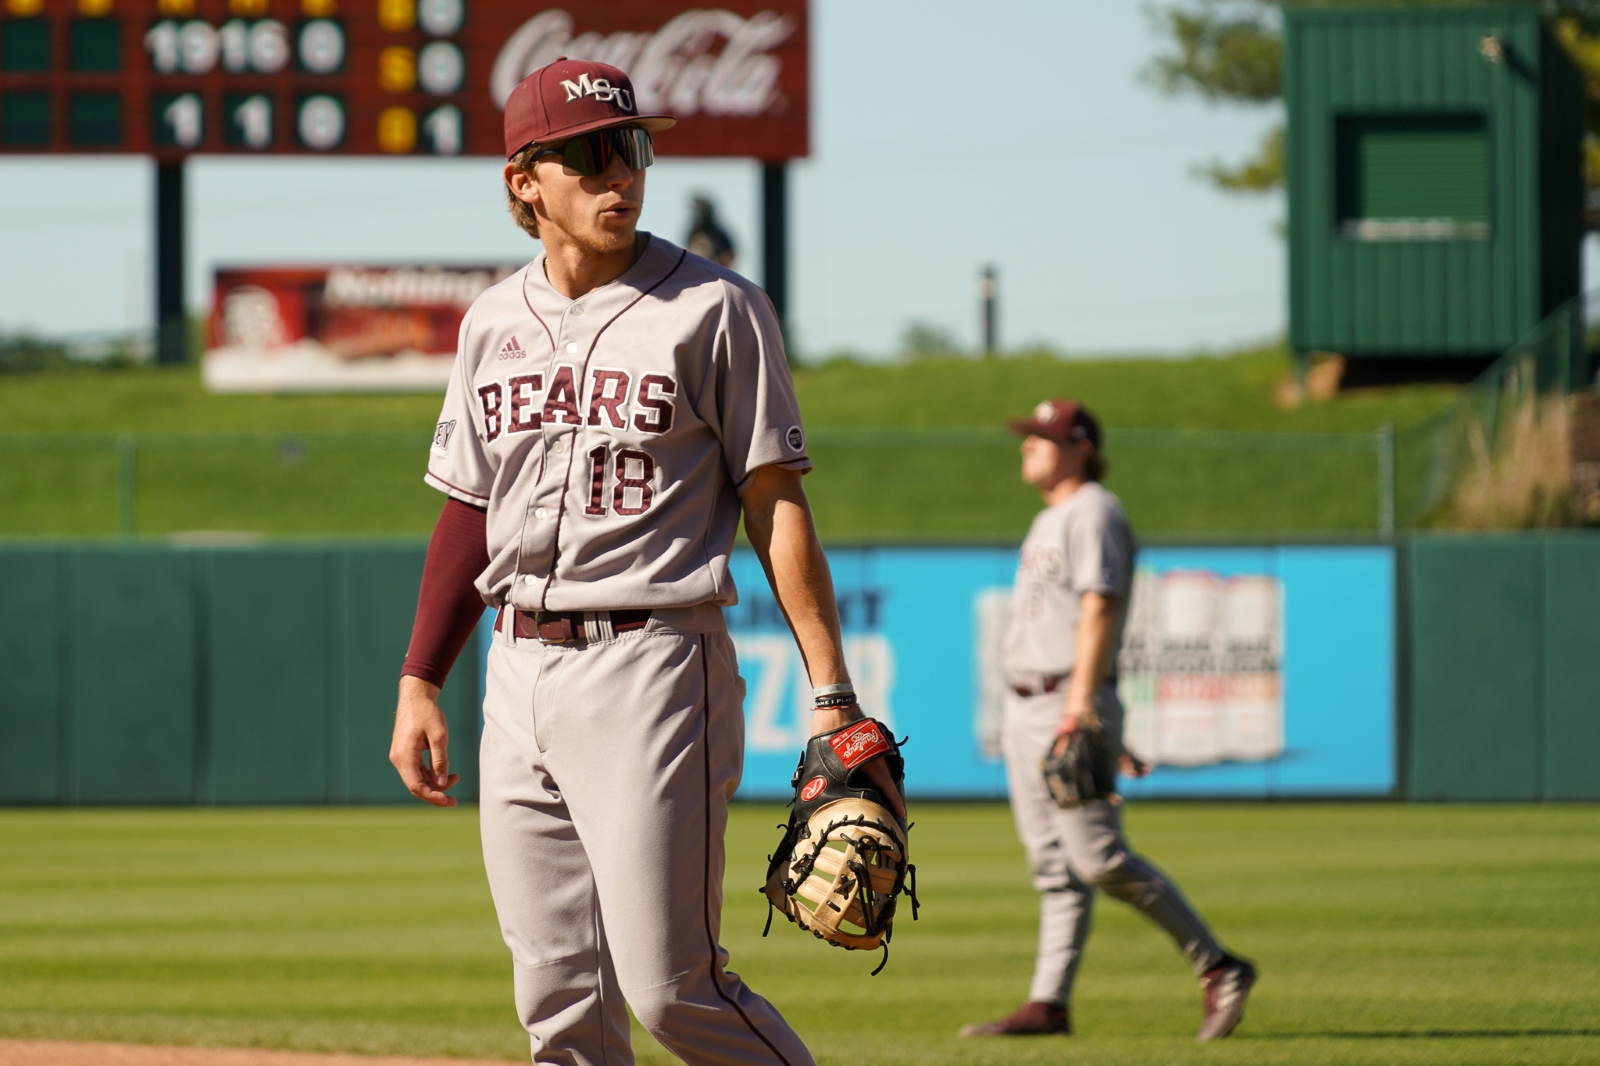 Spencer Nivens, wearing a Missouri State baseball uniform, plays second base during a game at Hammons Field in Springfield, Missouri.